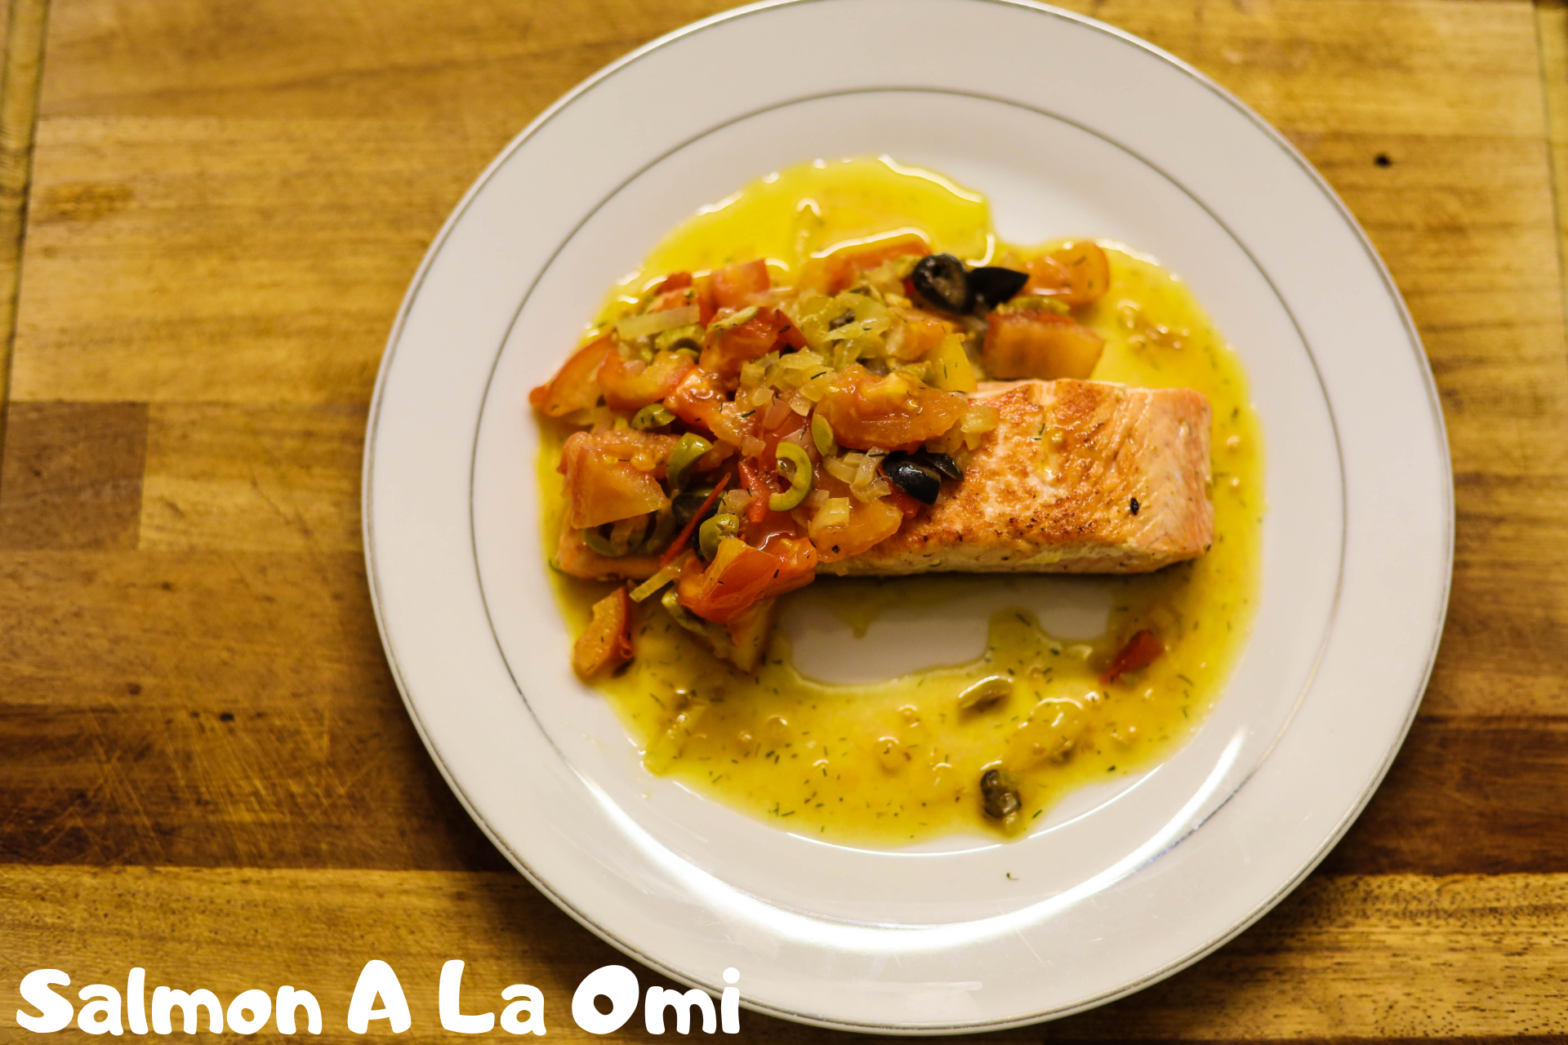 Pan-fried salmon with hot tomato salsa